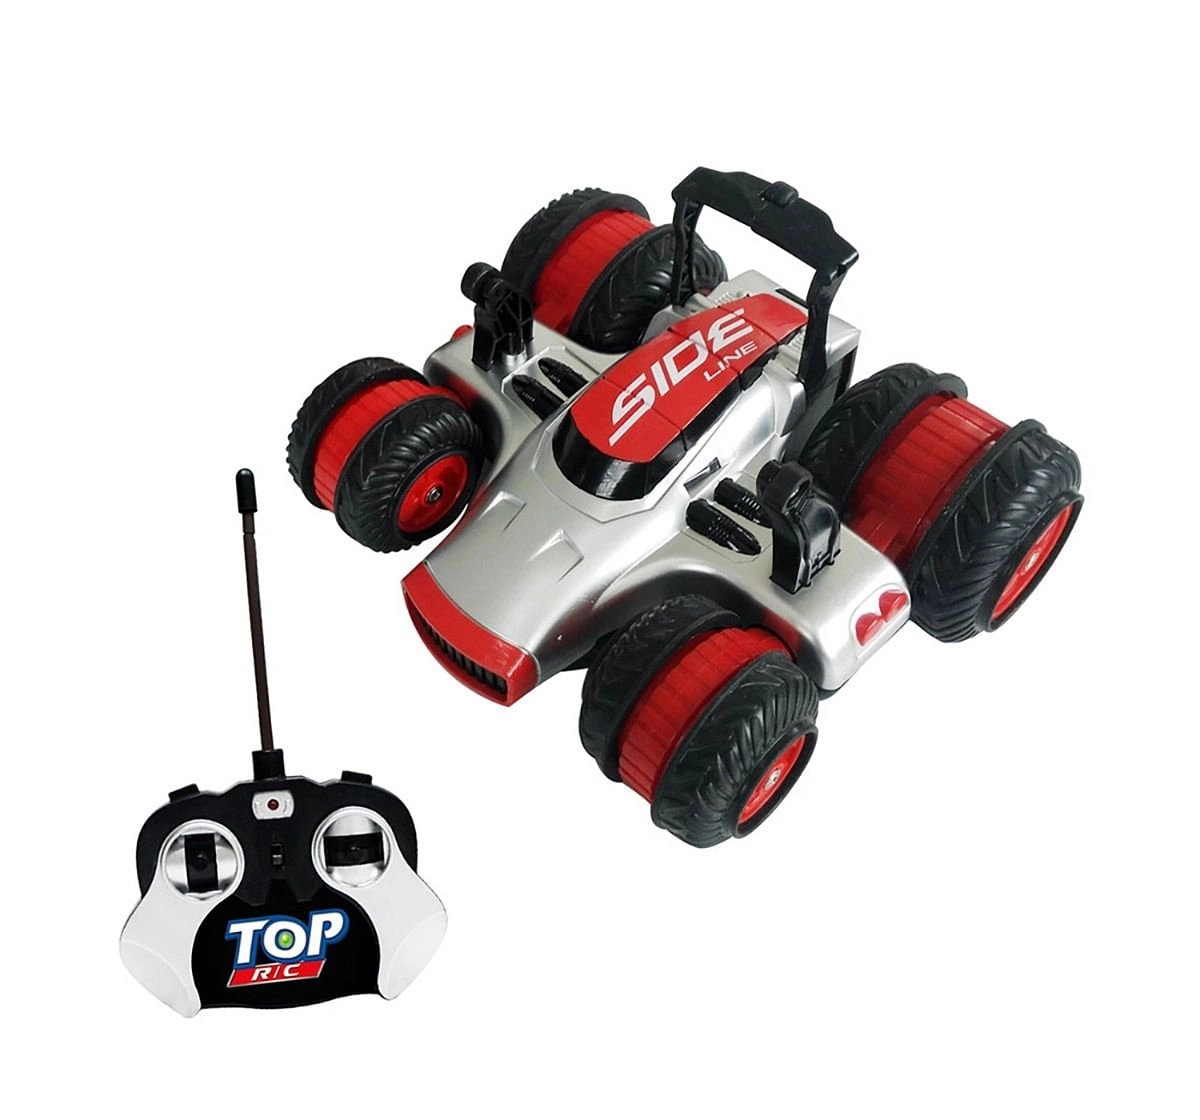 Yinrun Spin Slider 360 Radio Control Vehicle Remote Control Toys for Kids age 6Y+